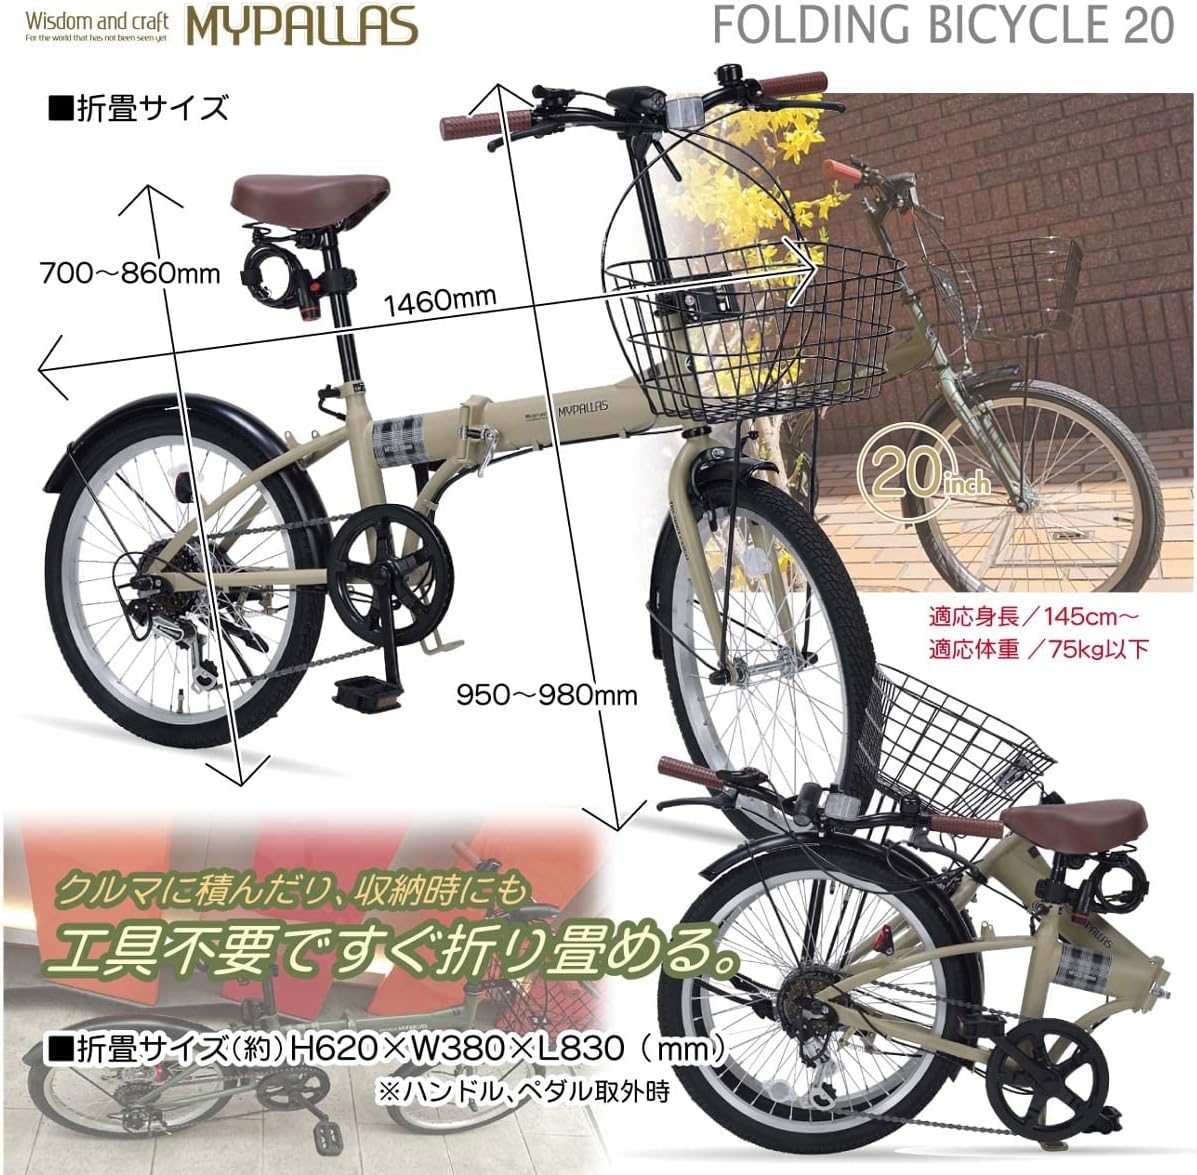  my palas foldable bicycle 20 -inch MF205SERENO green fore all-in-one *6SP stylish change speed gear attaching [ Honshu only free shipping ]